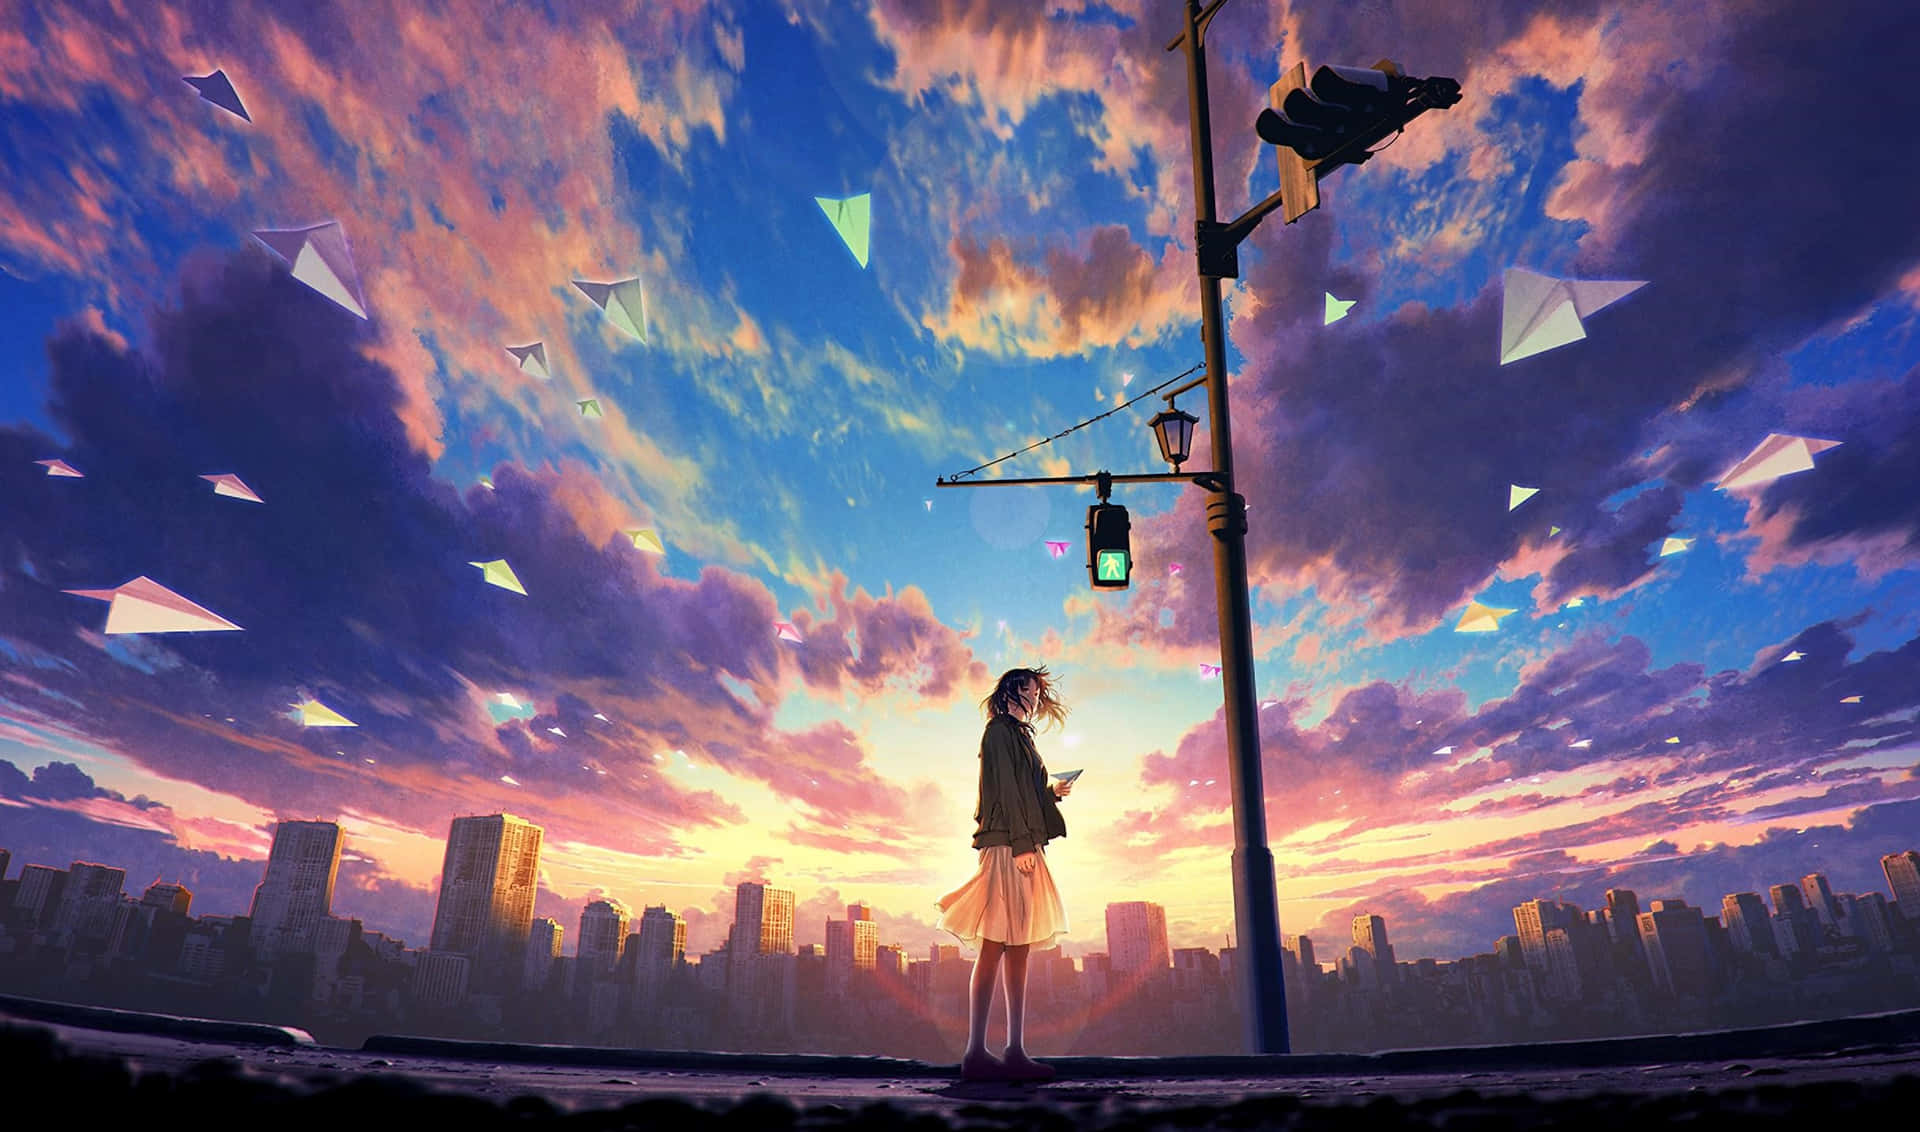 Adventure Awaits In This Cute Anime Scenery